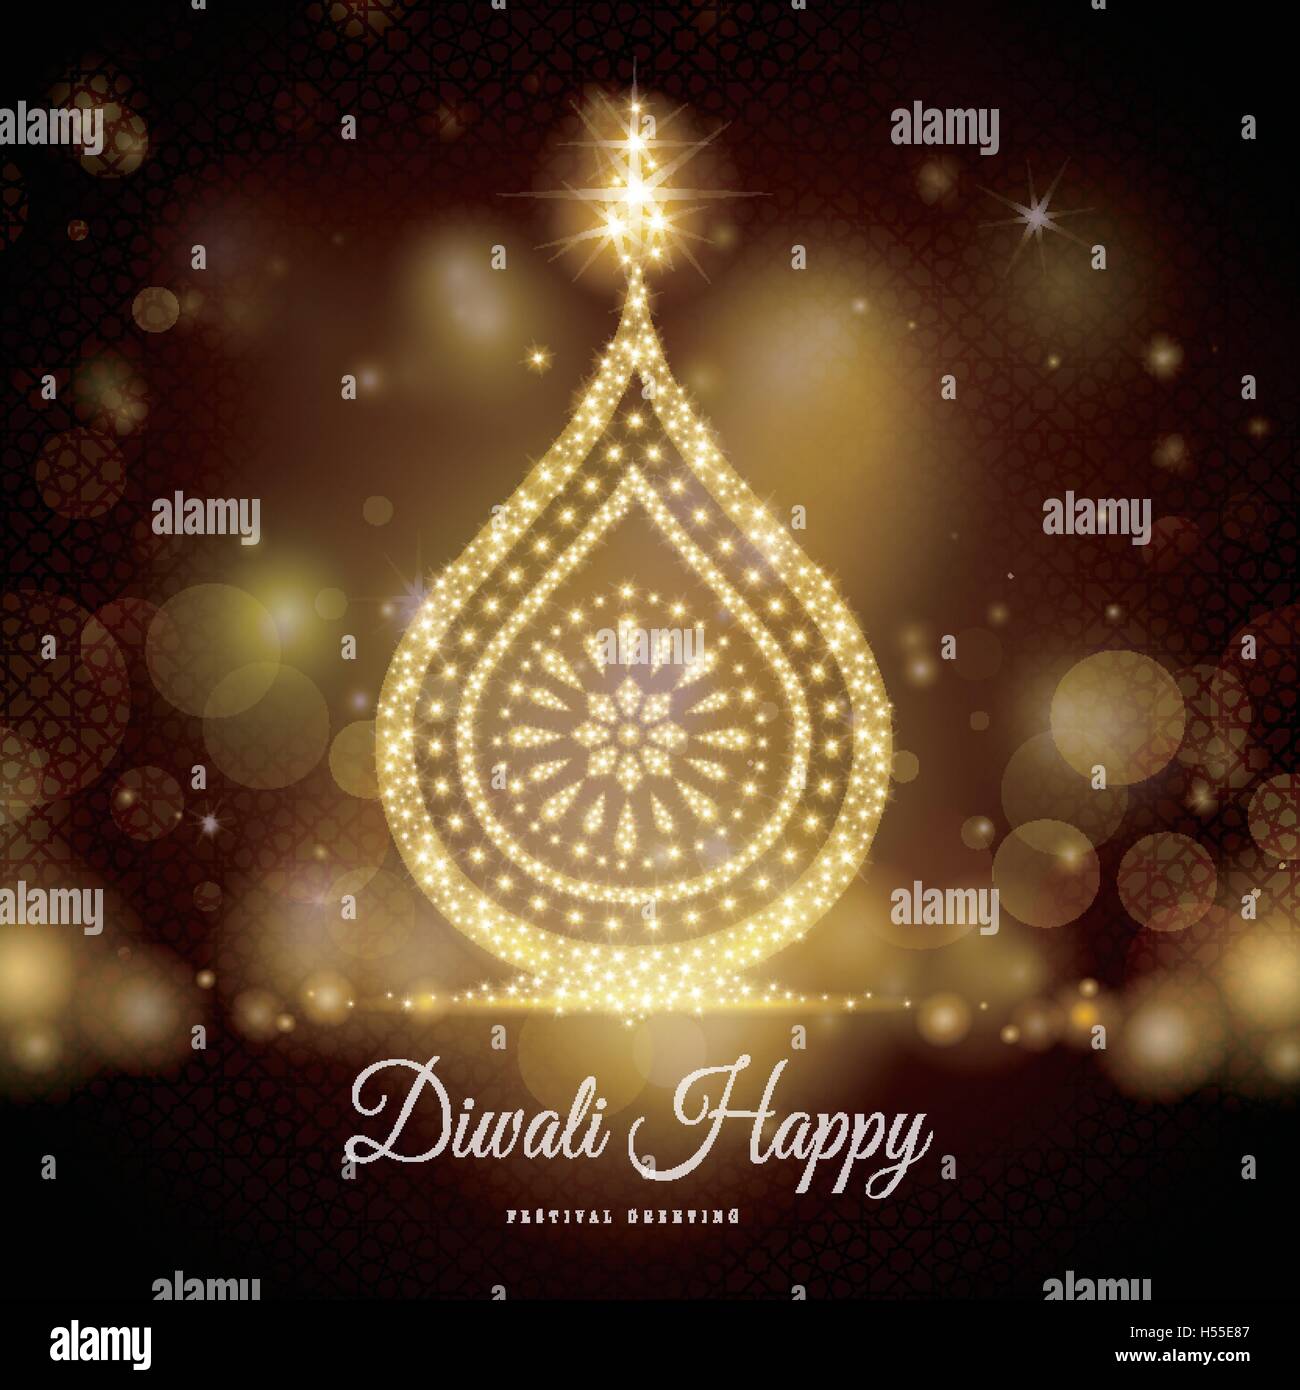 Happy Diwali Festival Greeting Text With Candle Decorations And